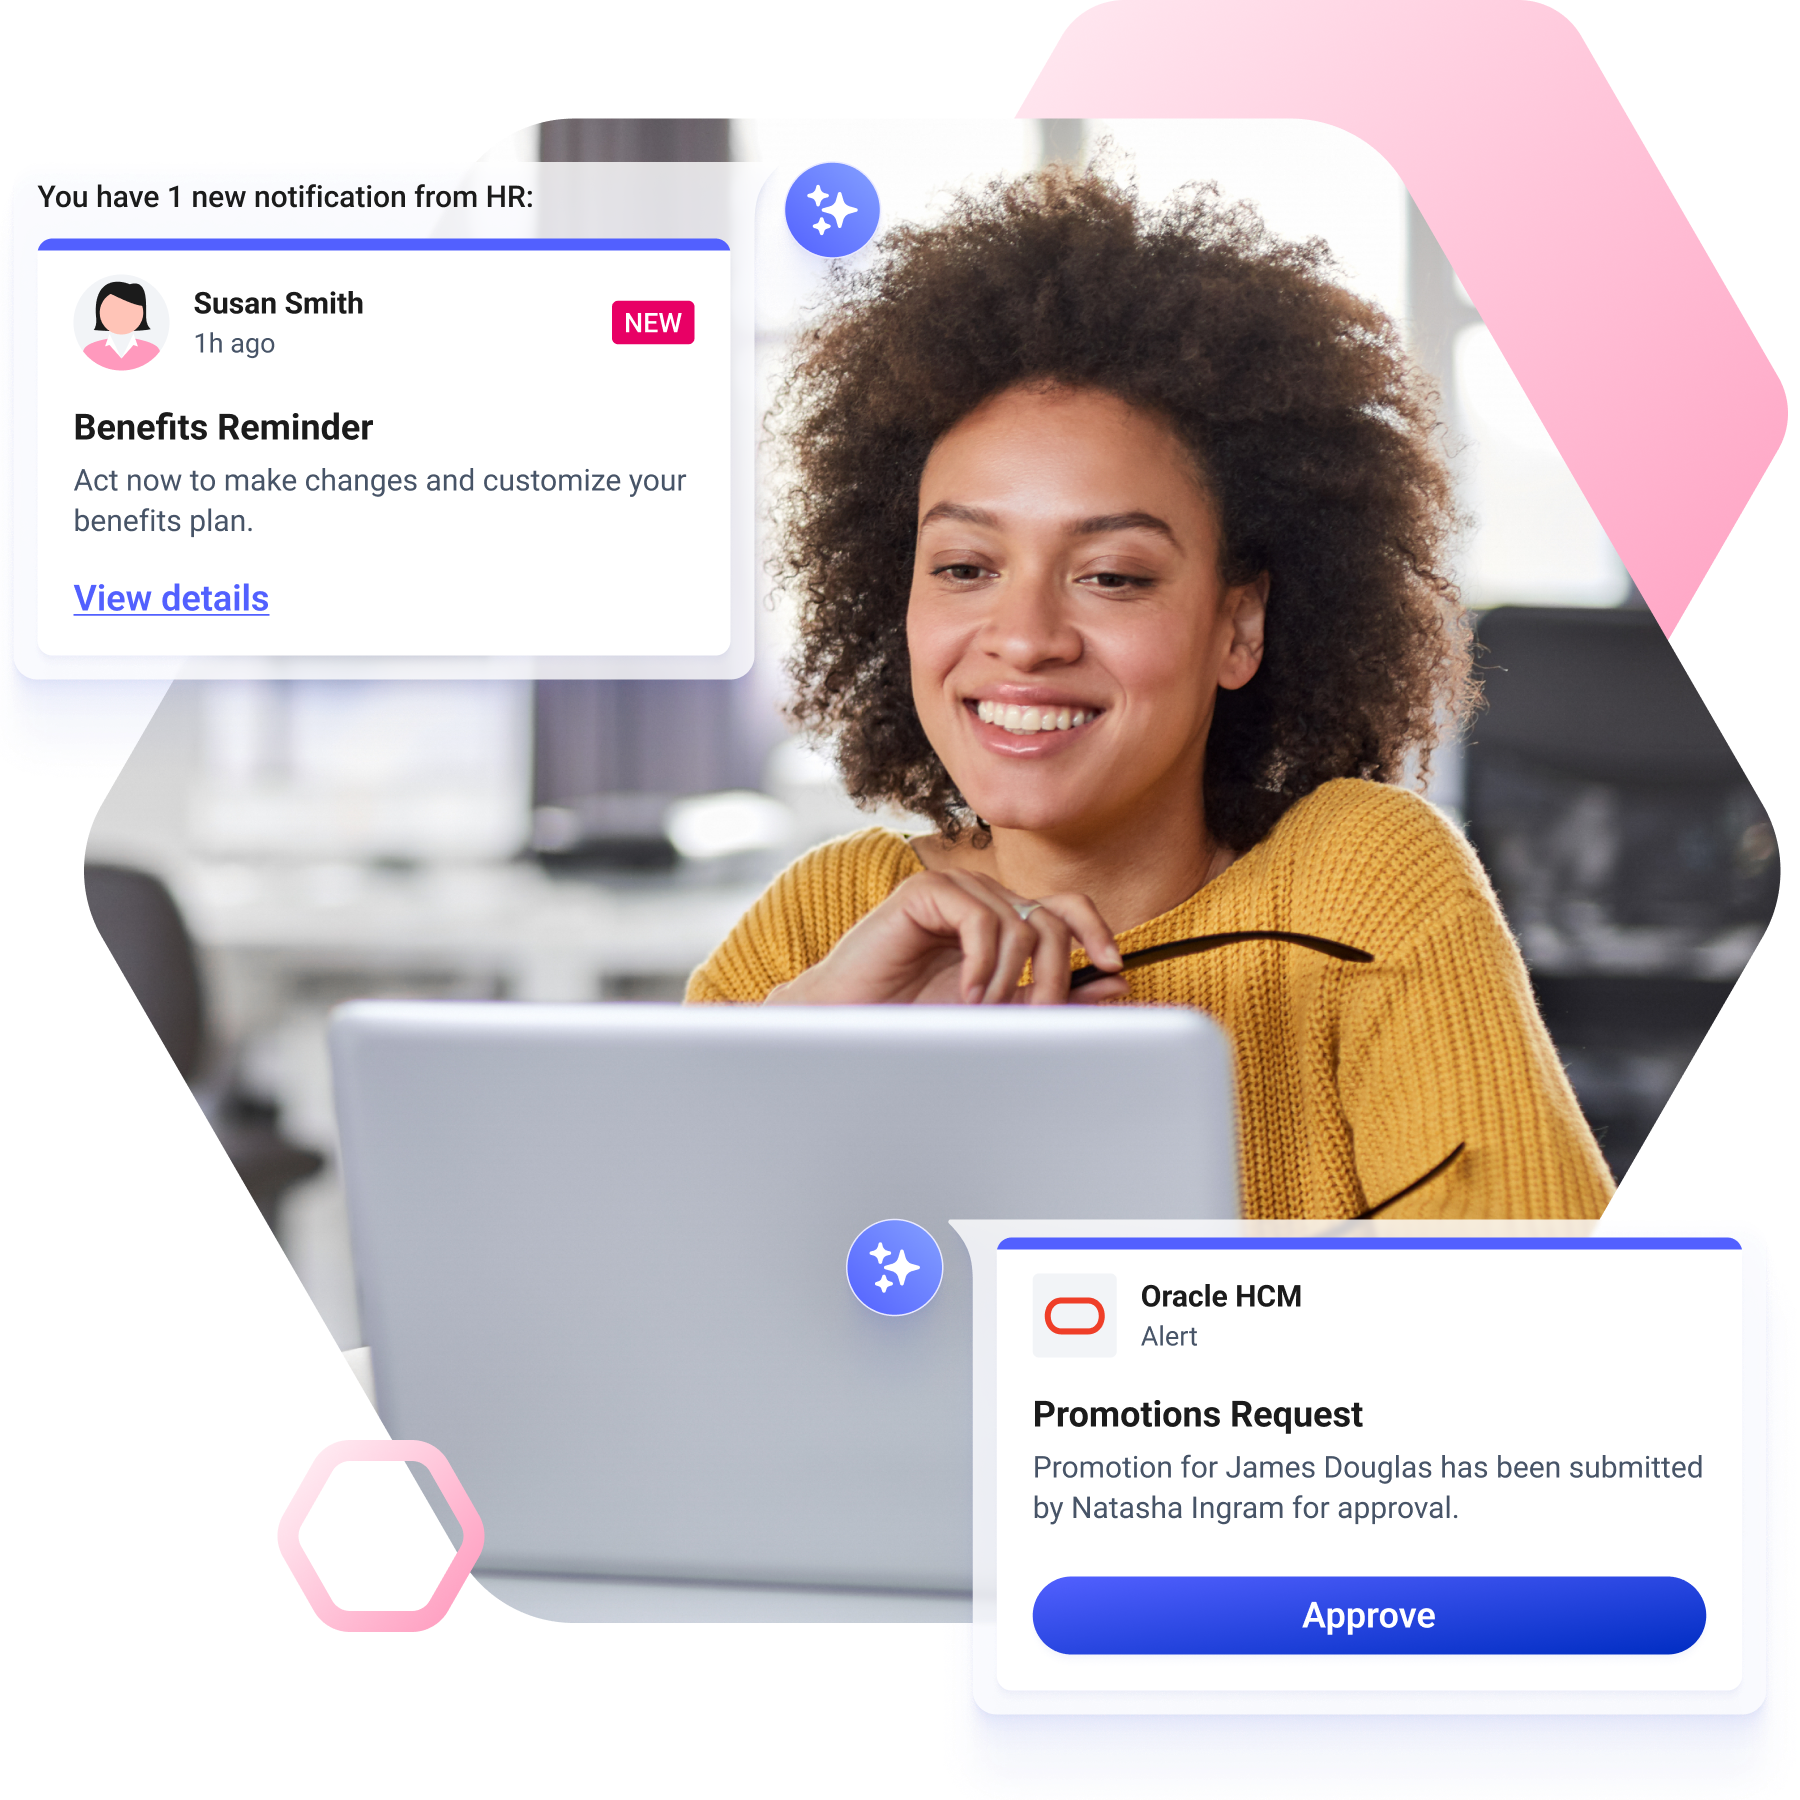 Workgrid's AI-powered assistant streamlines HR communications into one unified stream, combining approvals, reminders, and notifications within the flow of work.